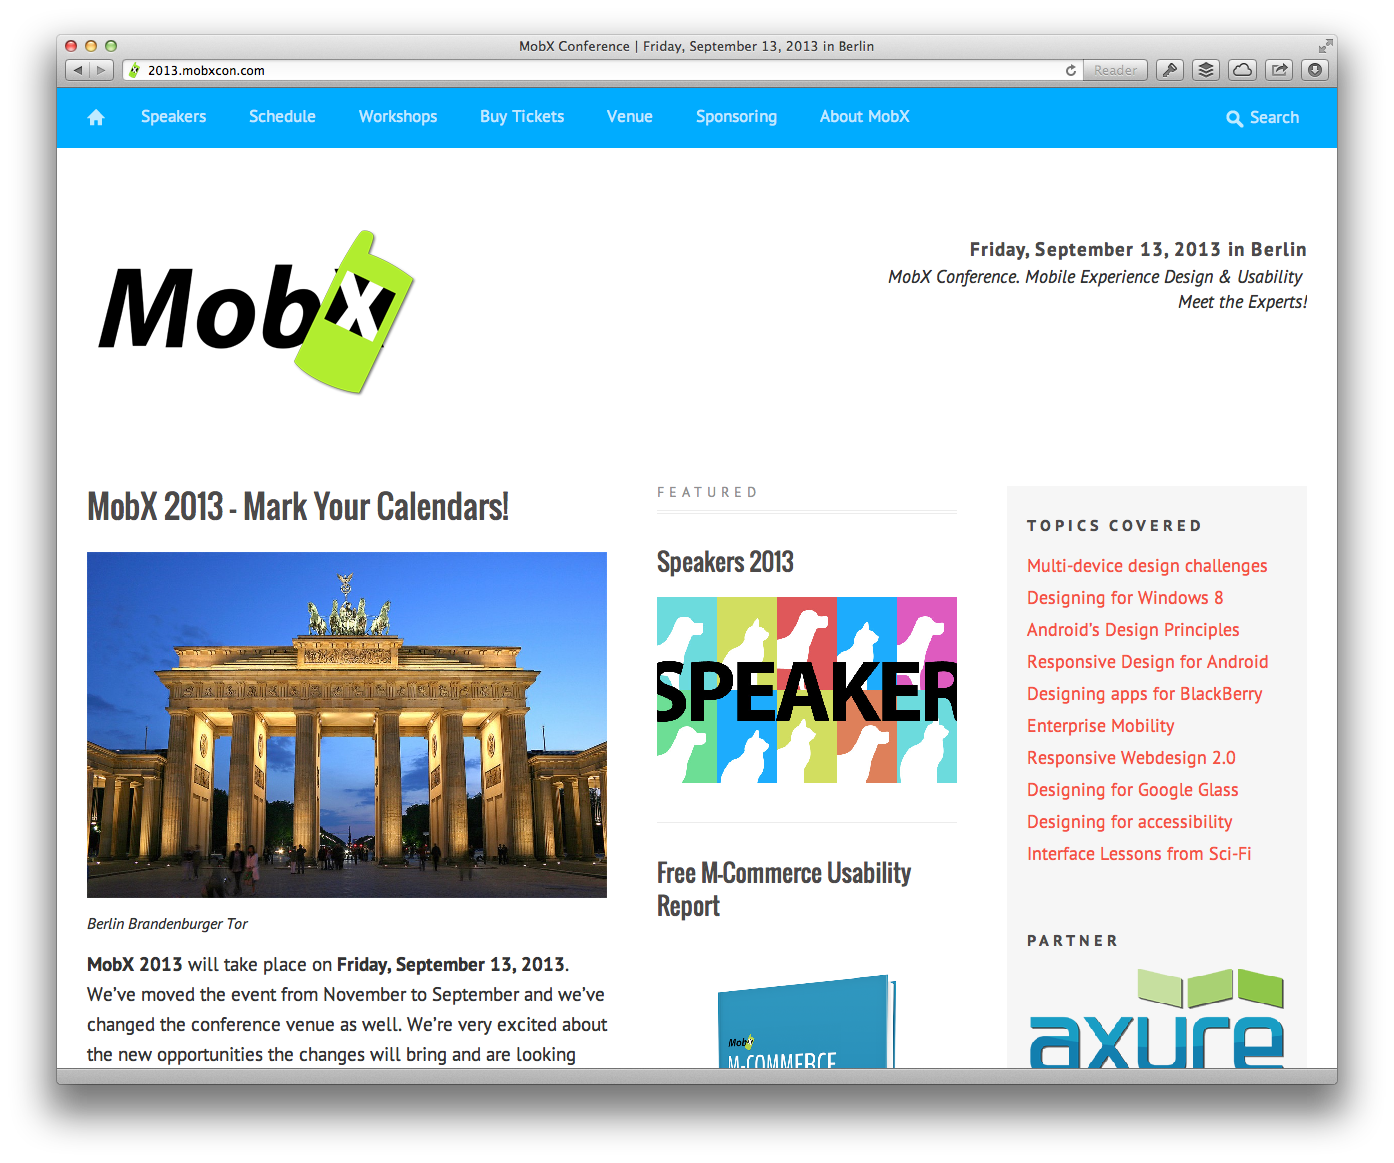 Screenshot of the Mobx mobile conference web site that takes places on September 13 in Berlin.